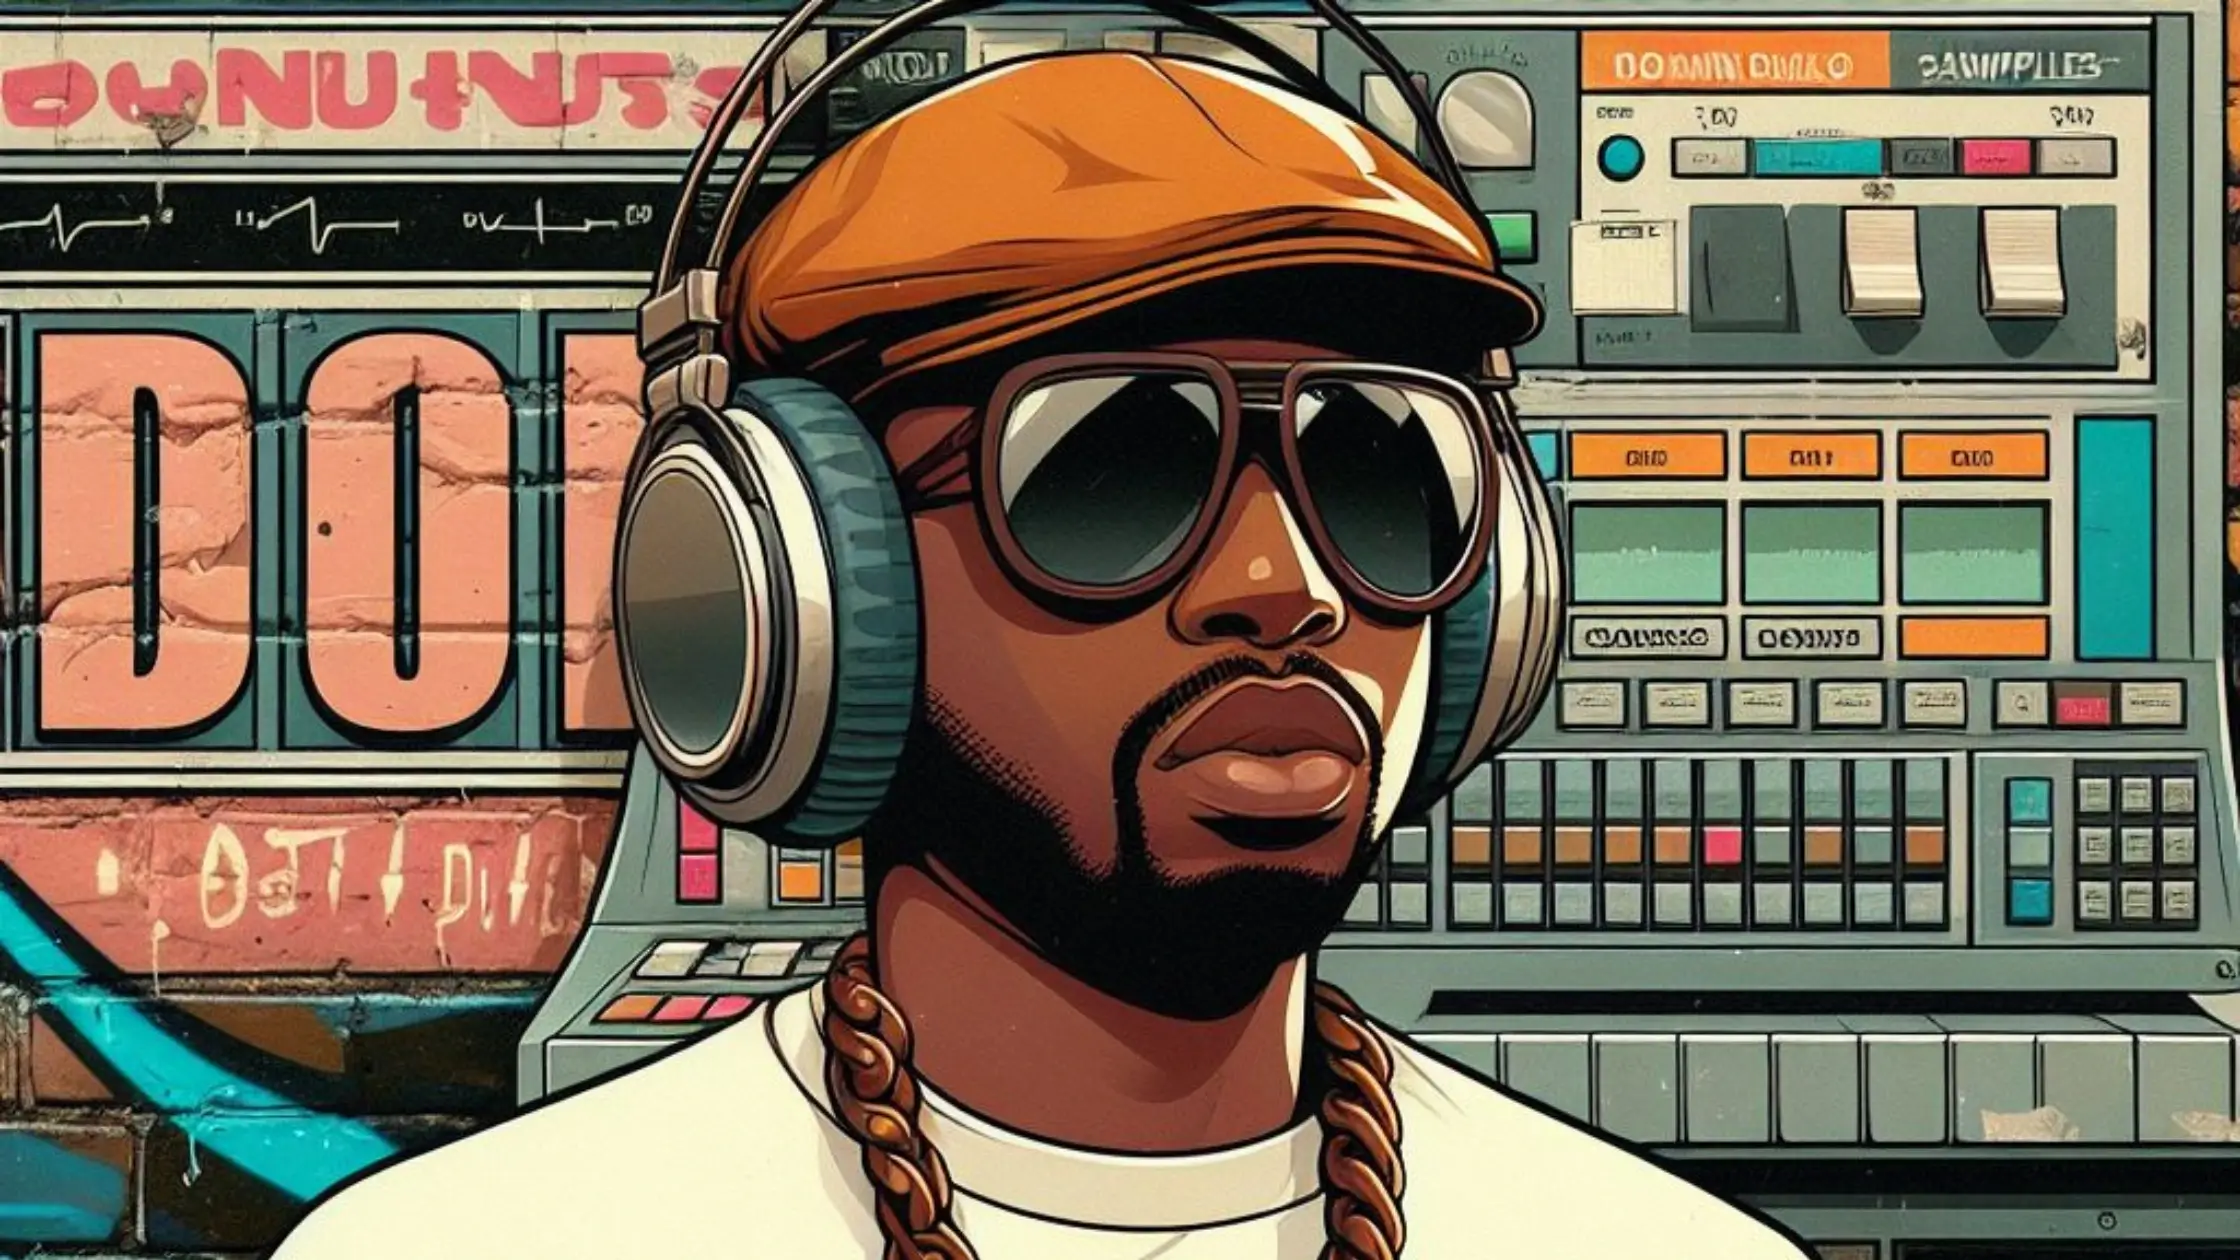 J Dilla drawn in the style of an anime